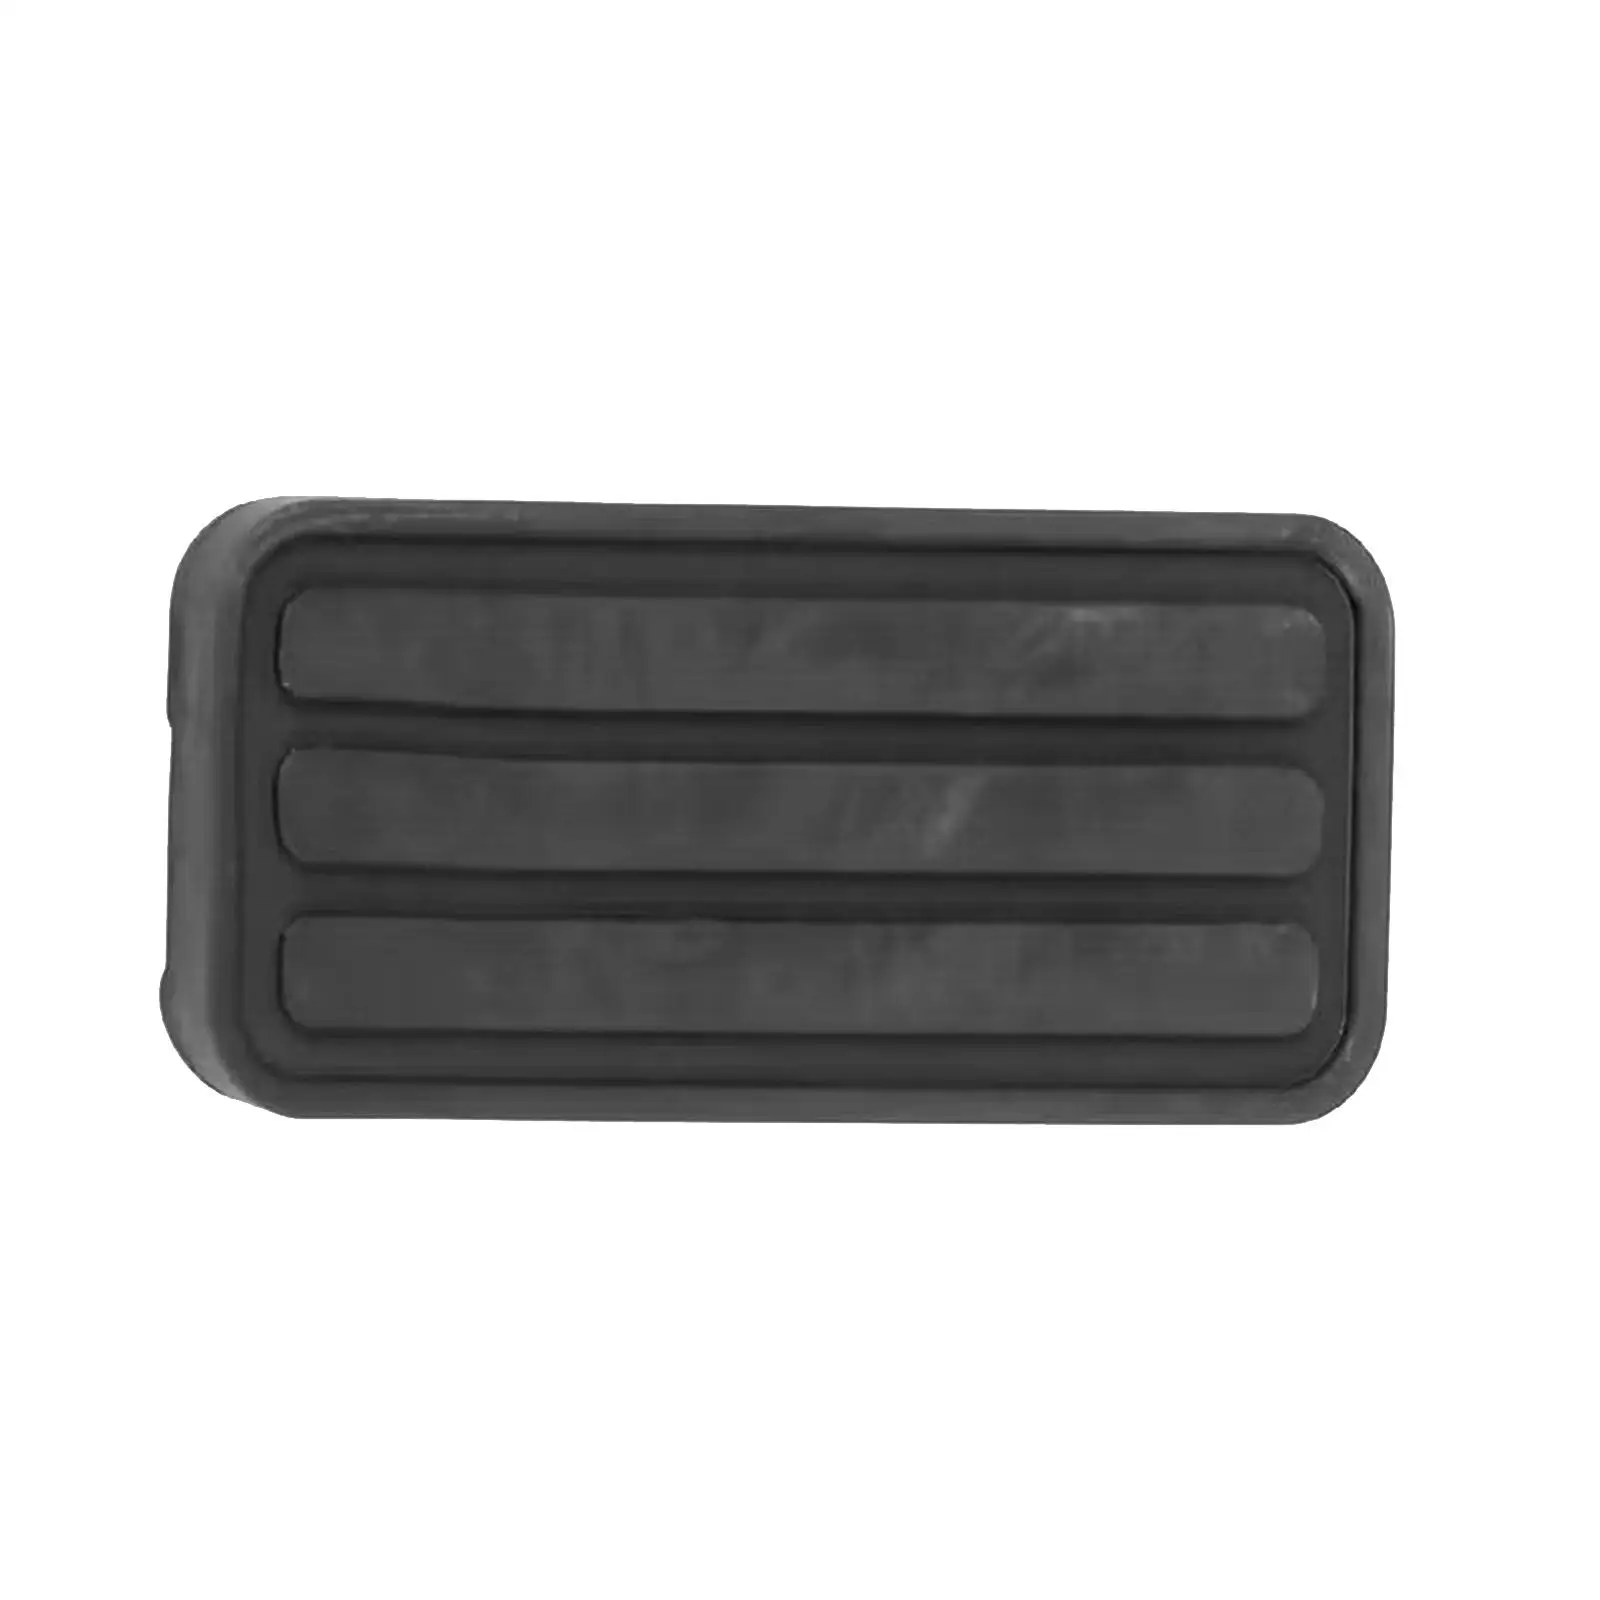 Gas Rubber Pedal Pad Car Accessories for VW 1990 to 2003 Spare Parts